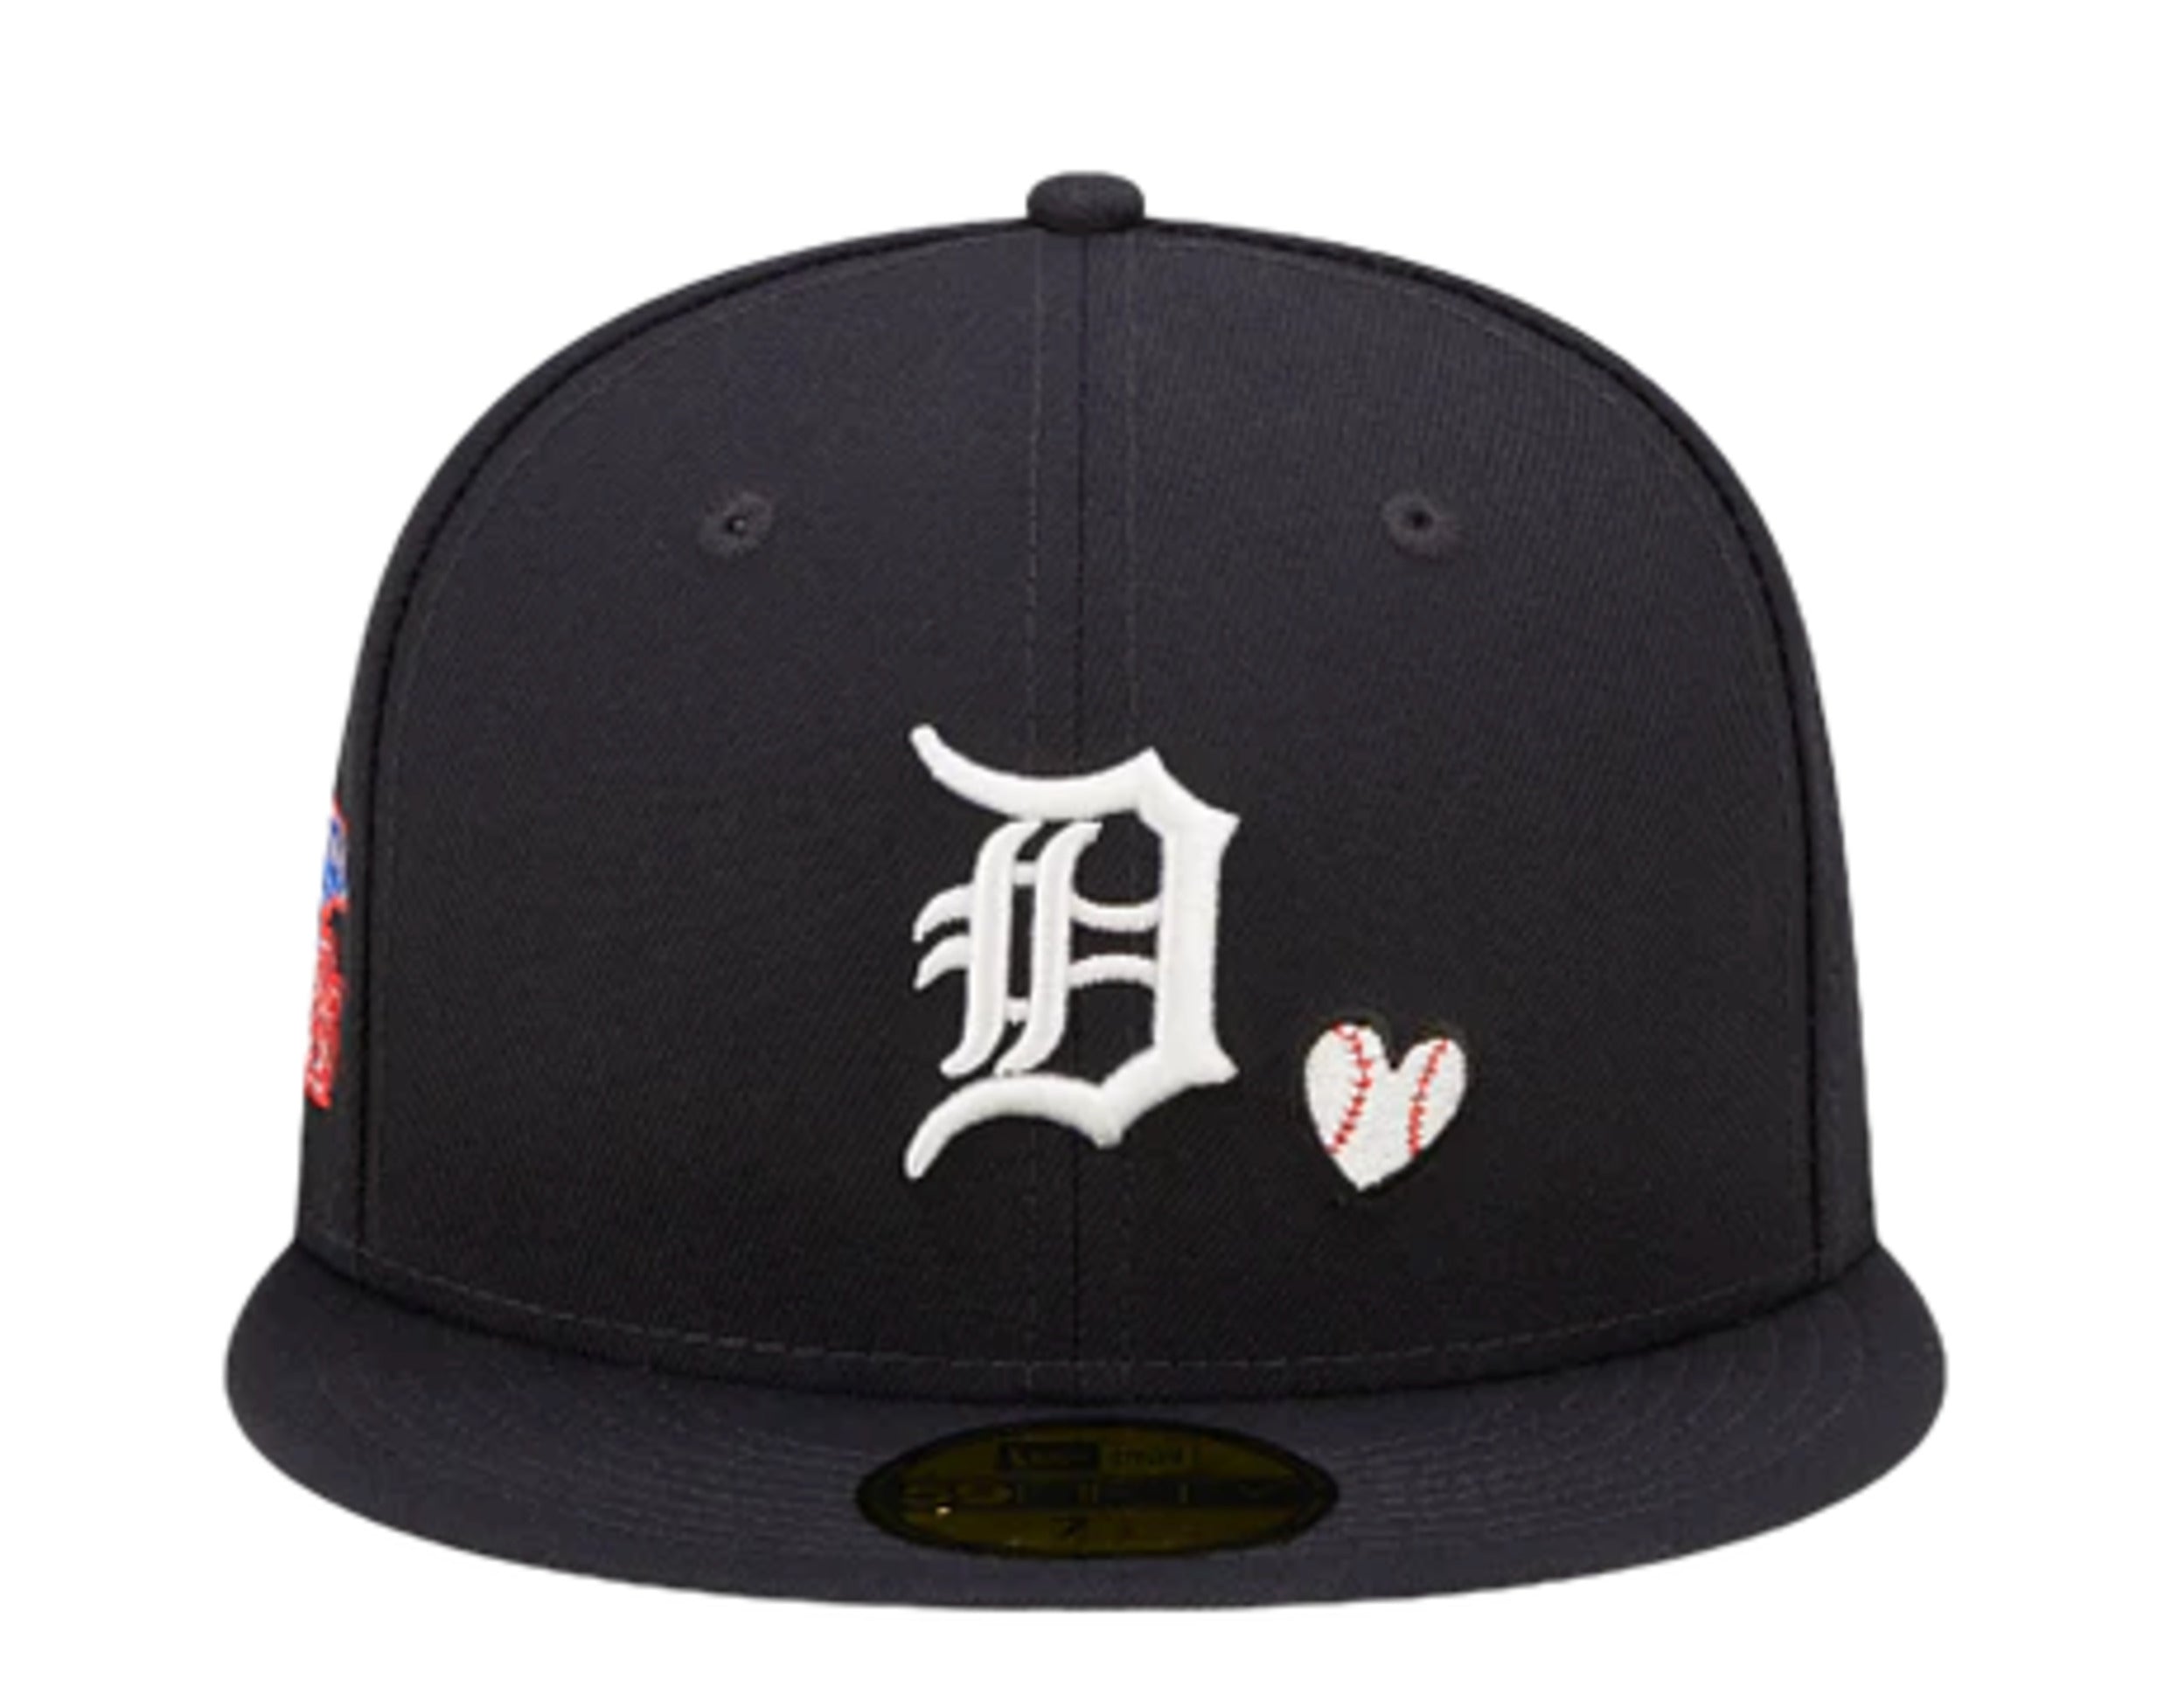 Detroit Tigers New Era Team Red, White & Blue 59FIFTY Fitted Hat